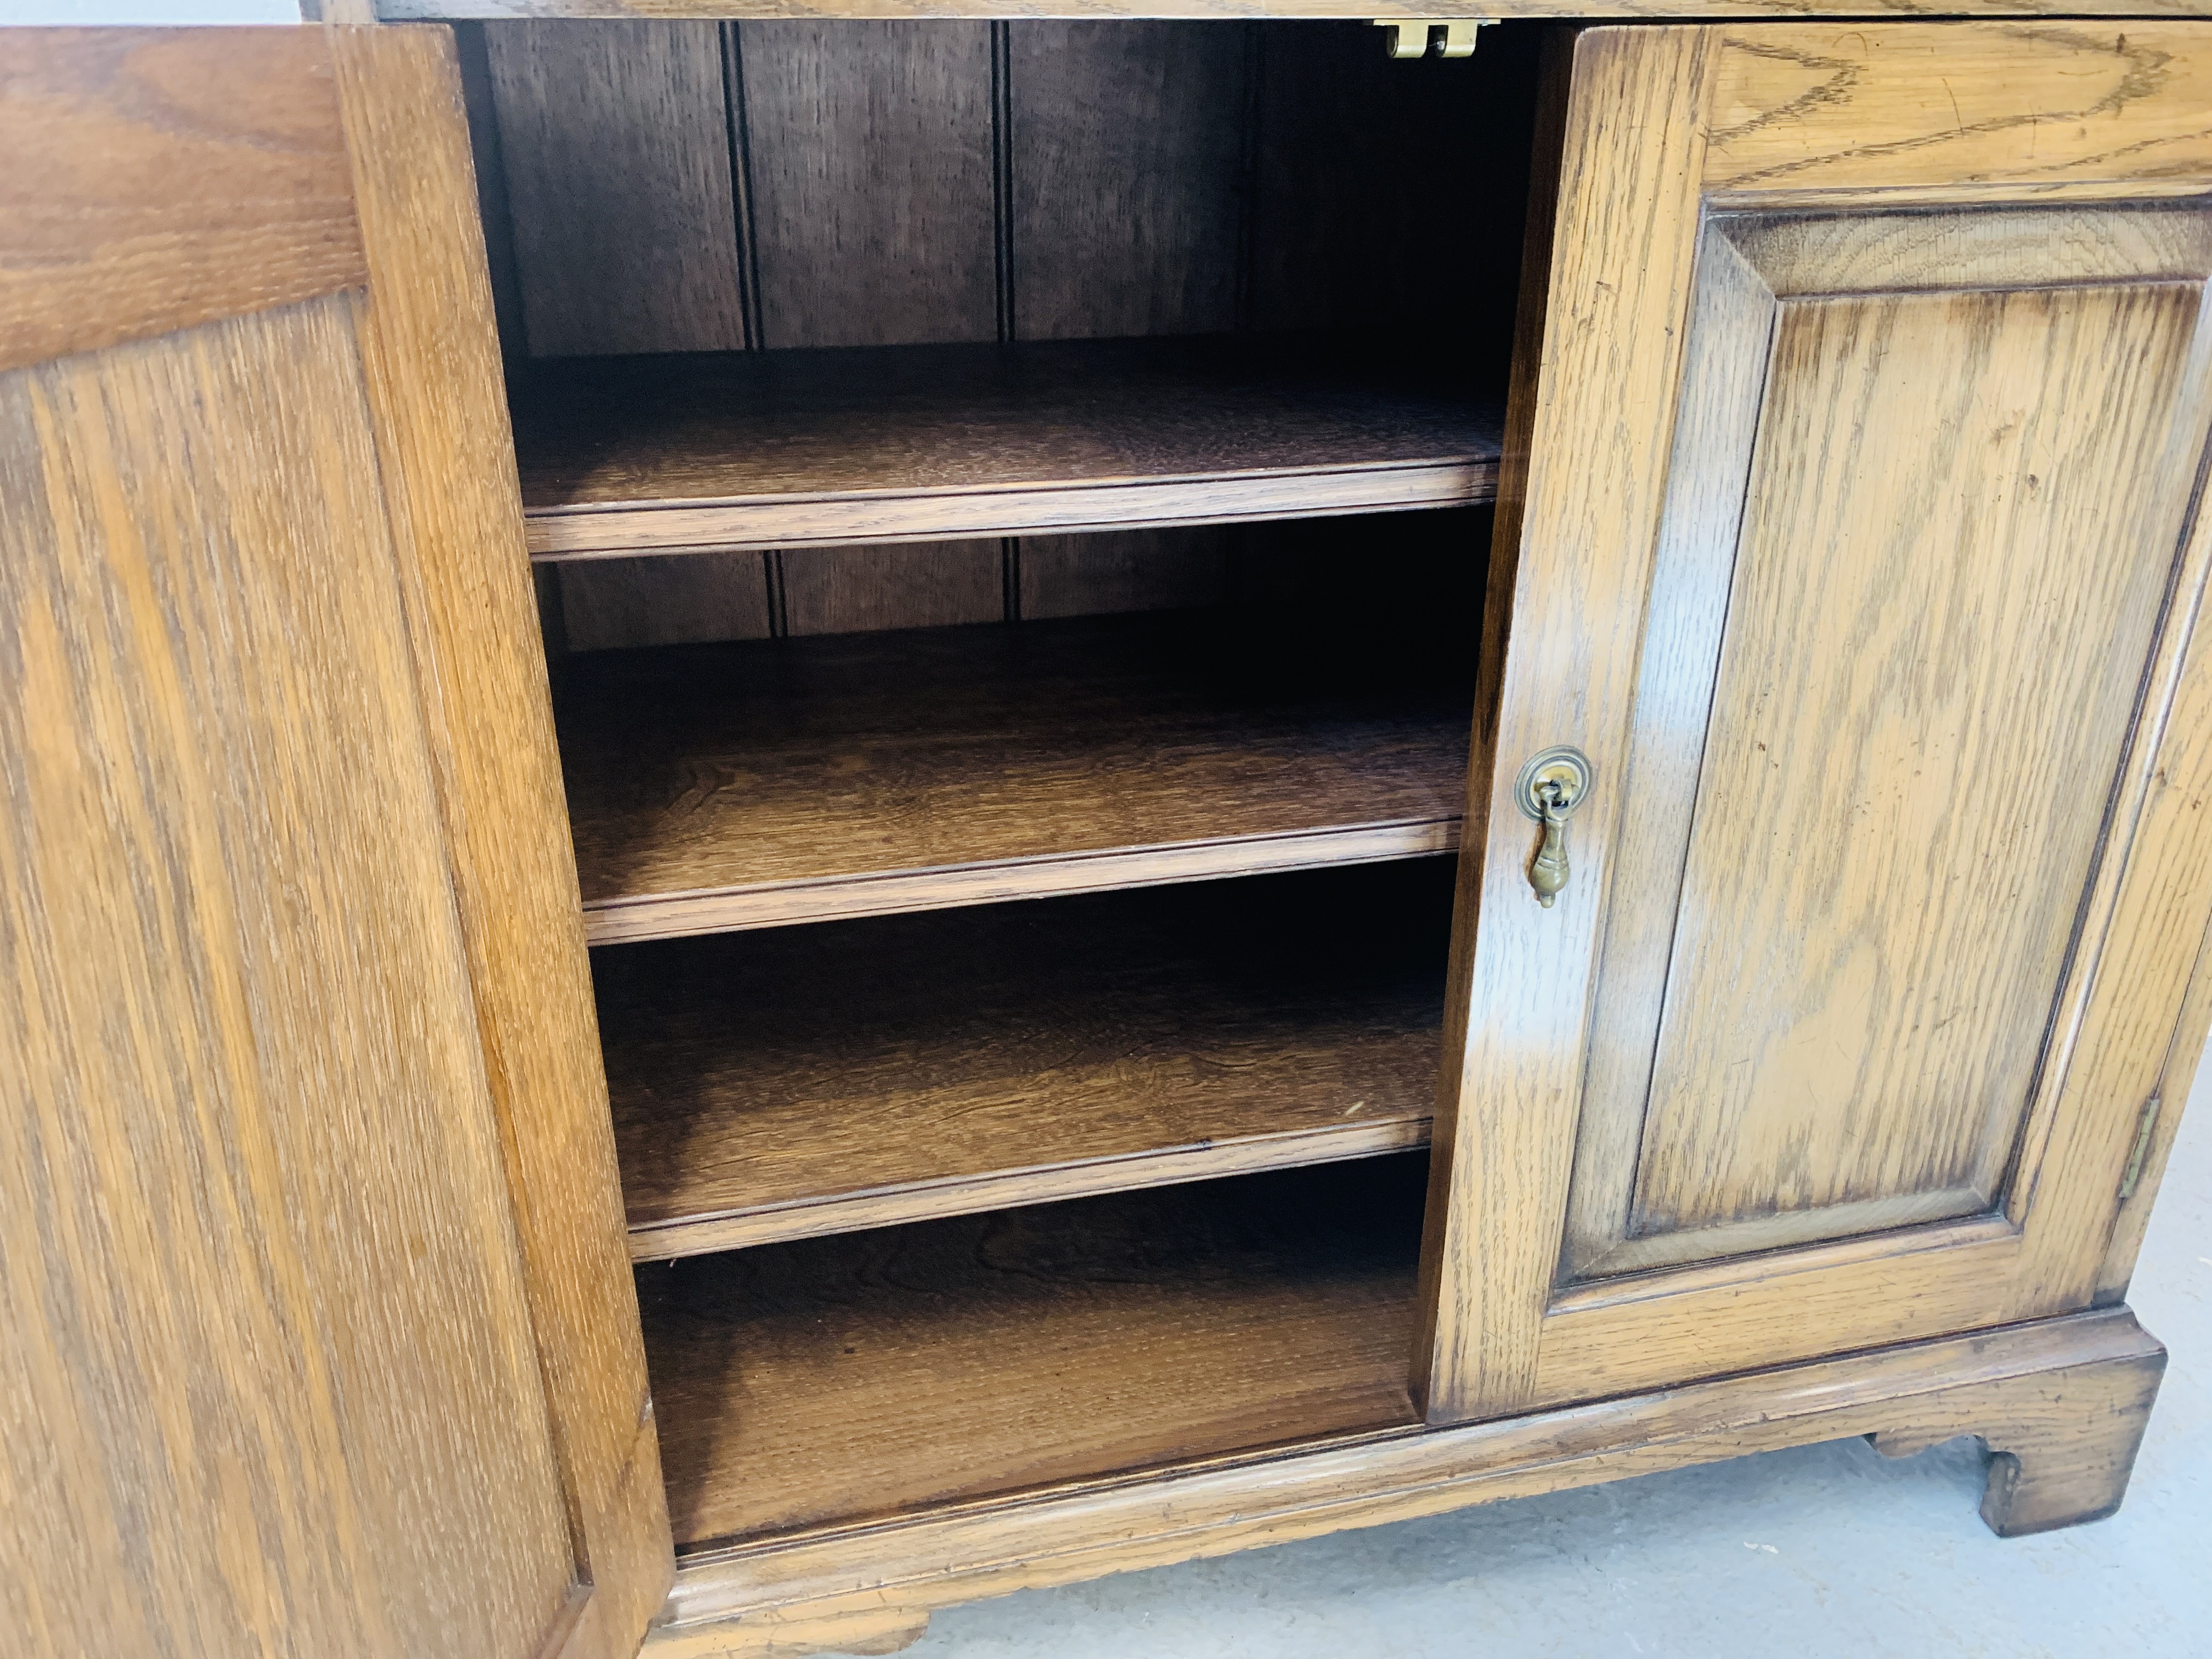 A QUALITY REPRODUCTION OAK BOOKCASE WITH CUPBOARD BASE BY DAVID NOTTAGE CABINET MAKER - W 75cm. - Image 12 of 14